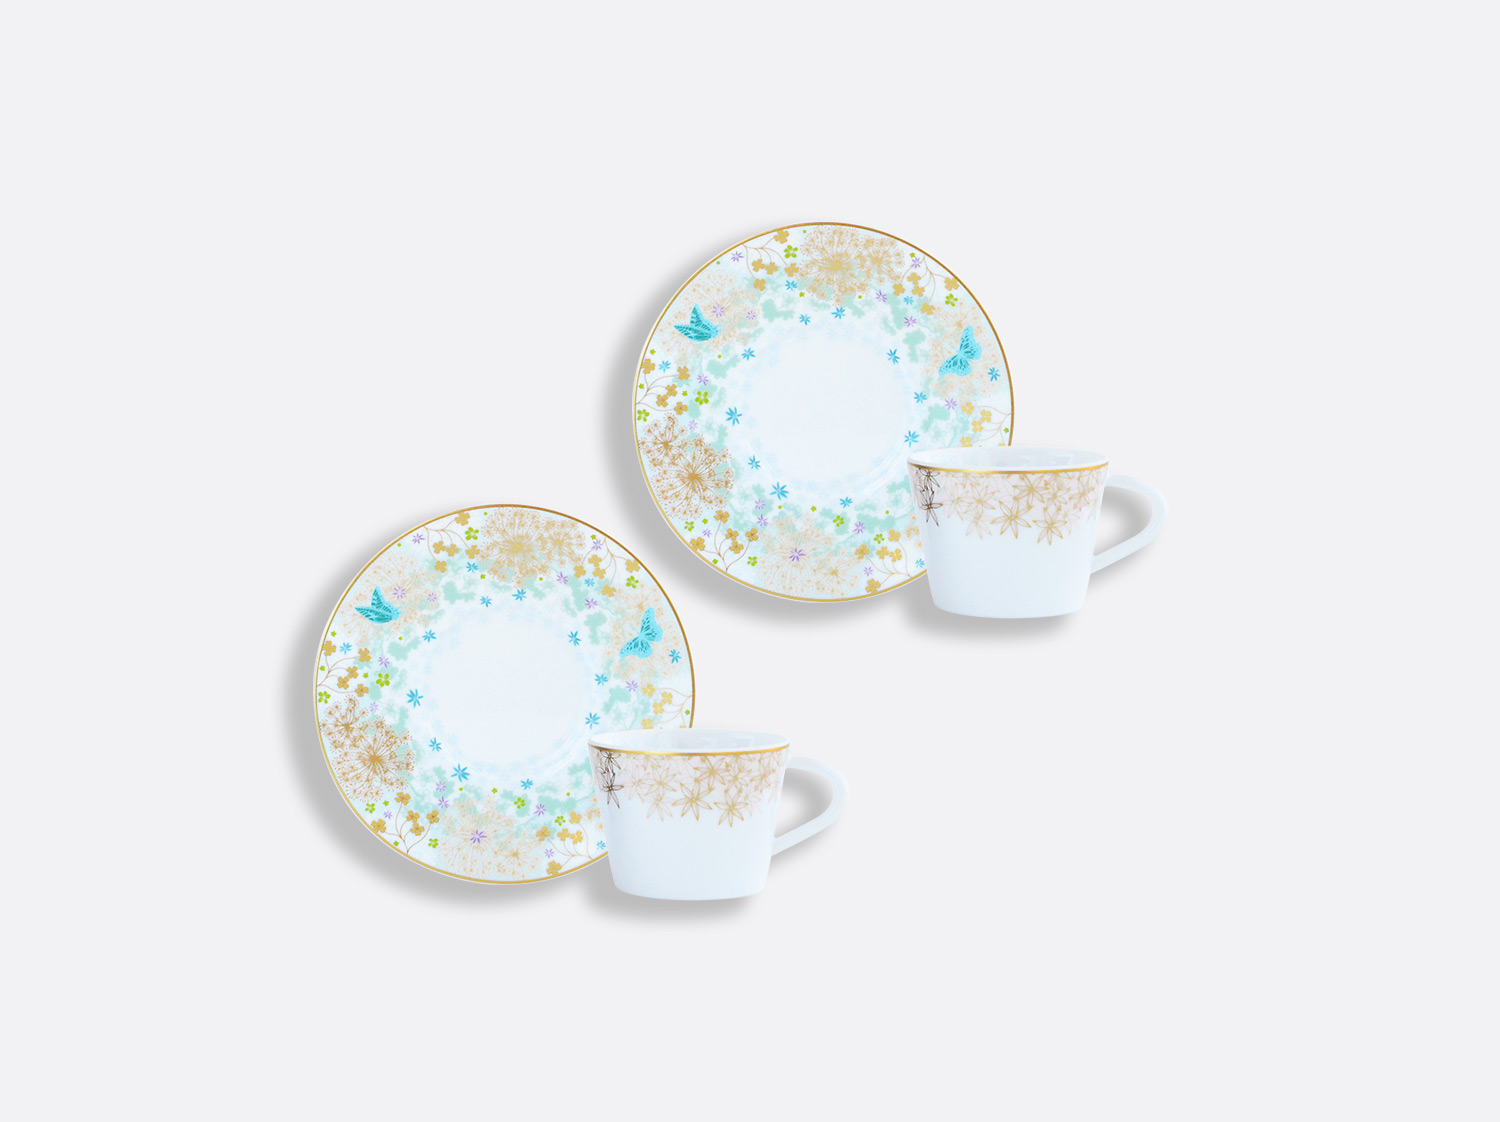 China Espresso cup and saucer gift box - 2 Oz - Set of 2 of the collection FÉERIE - MICHAËL CAILLOUX | Bernardaud